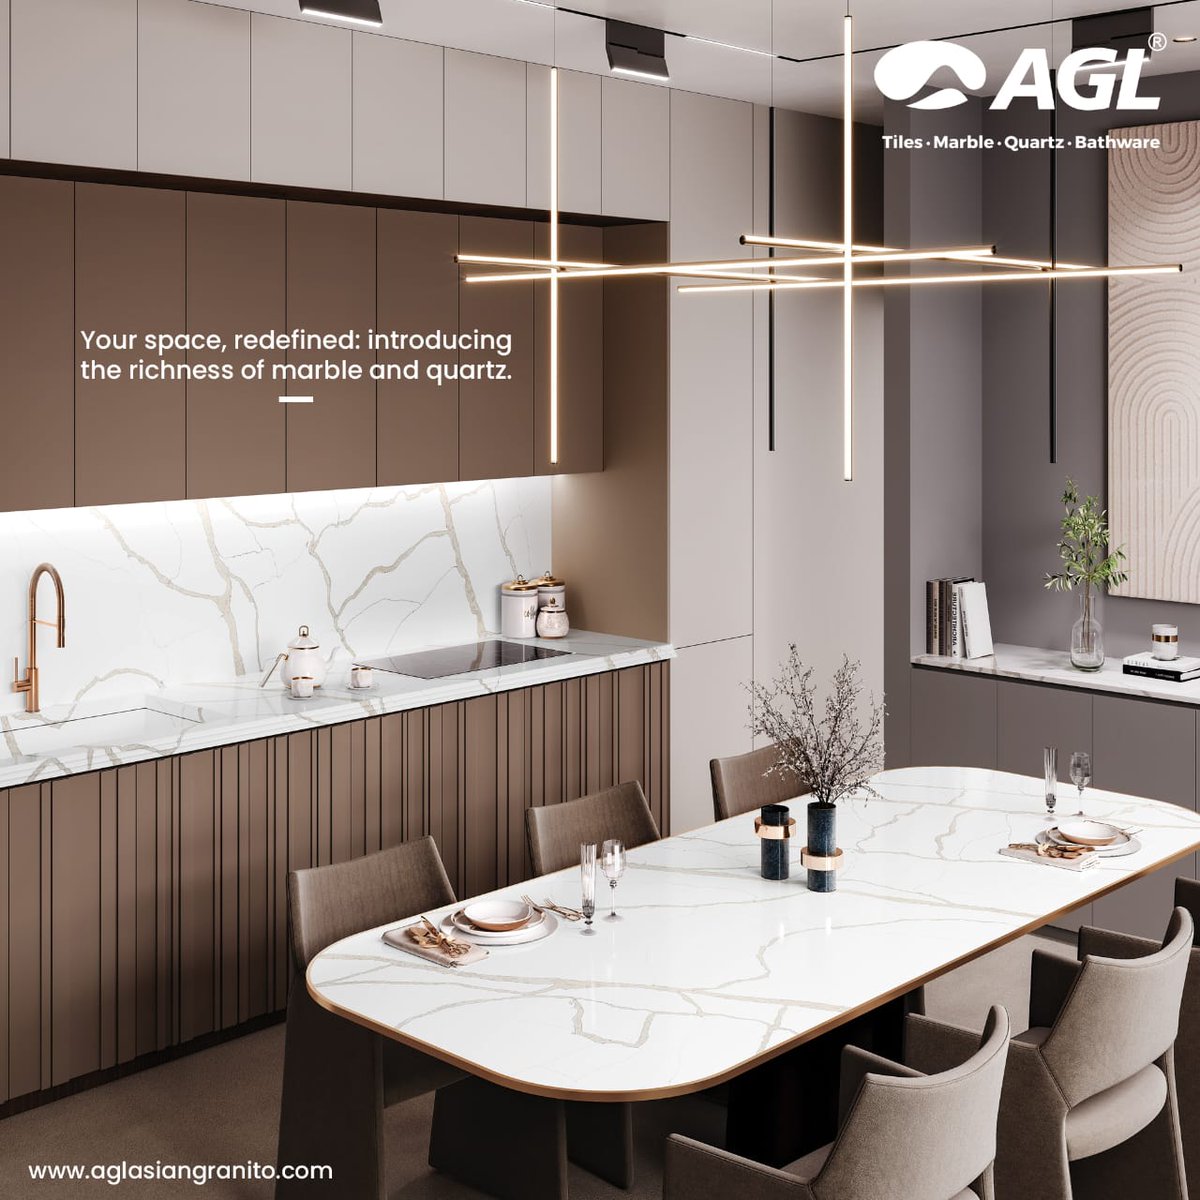 Your space redefined: introducing the richness of marble and quartz.

Stay tuned for more updates...

#architecturereconnectsummit #globalbusinessreconnect #b2bconference #wowawards #awardceremony #exhibition #networking #architecture #architectureconference  #AGL-marble&quartz